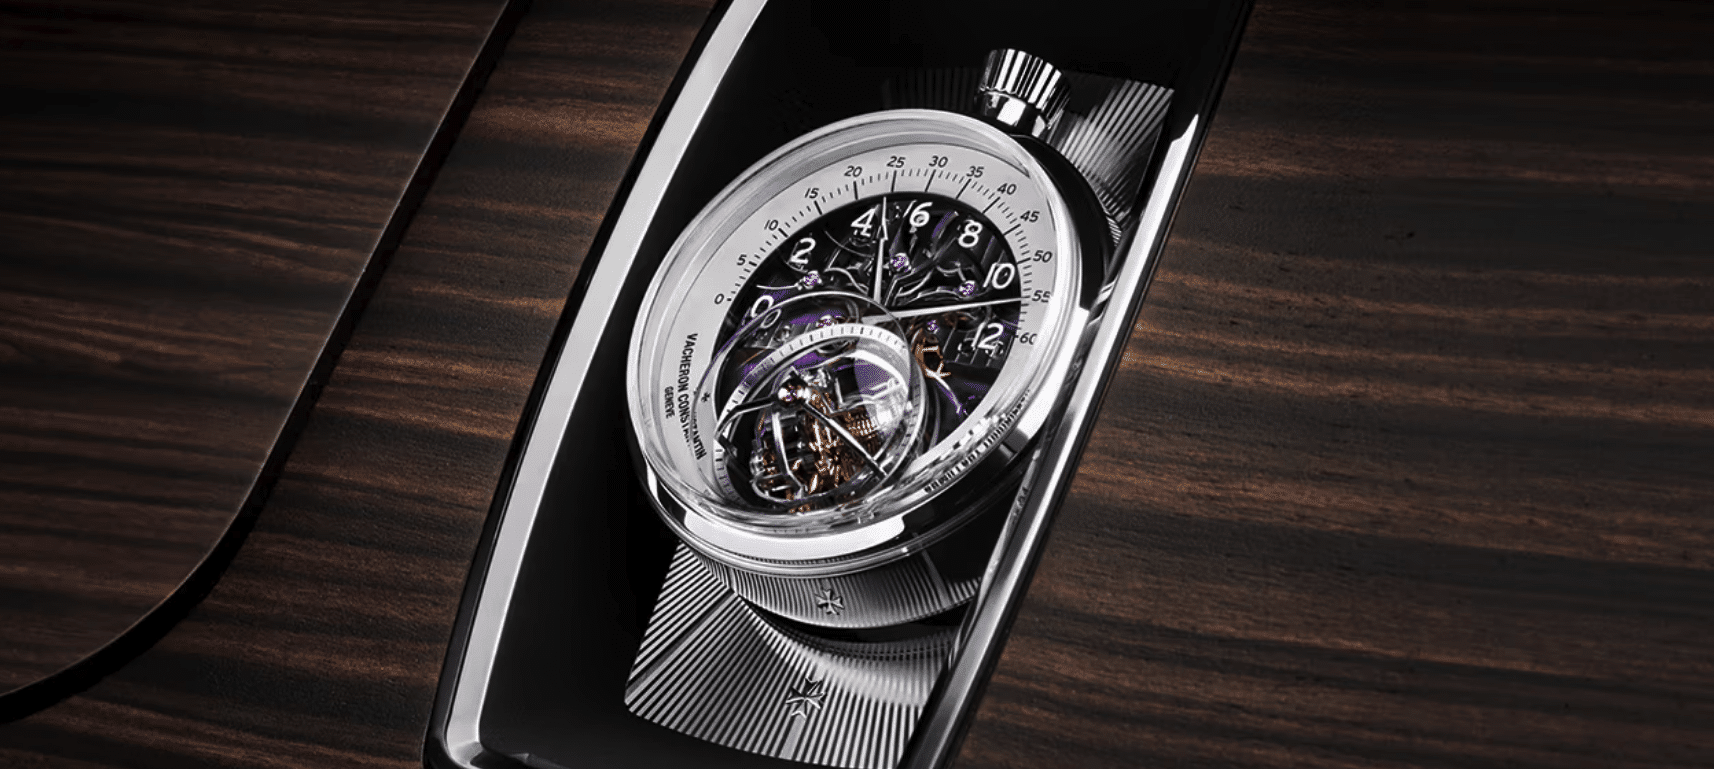 The Les Cabinotiers Armillary Tourbillon is a pièce unique watch and the first watch made by Vacheron Constantin for an automobile since 1928